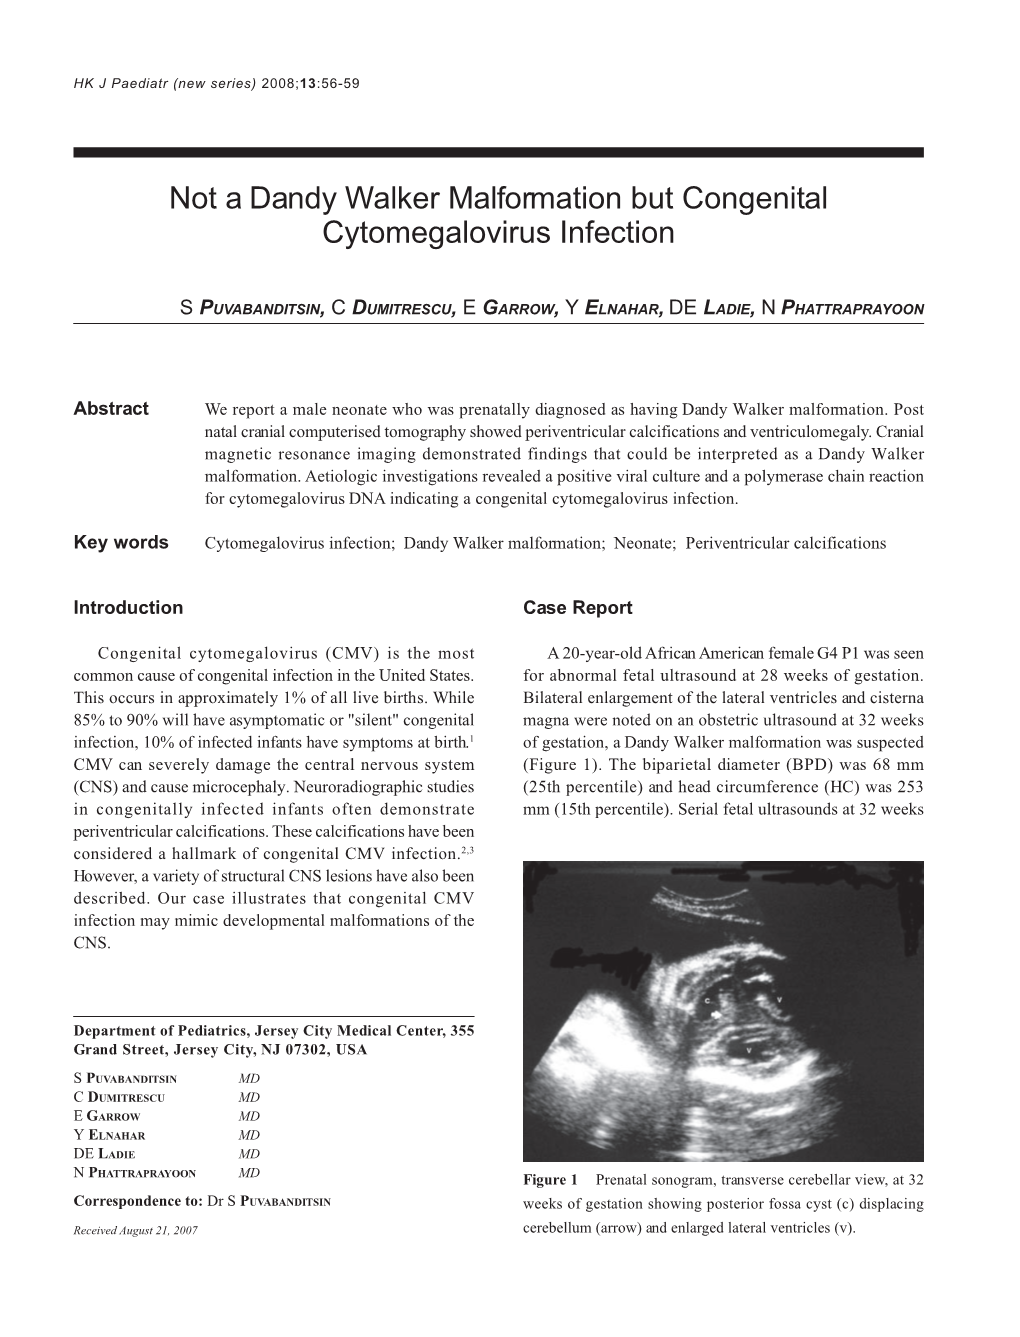 Not a Dandy Walker Malformation but Congenital Cytomegalovirus Infection